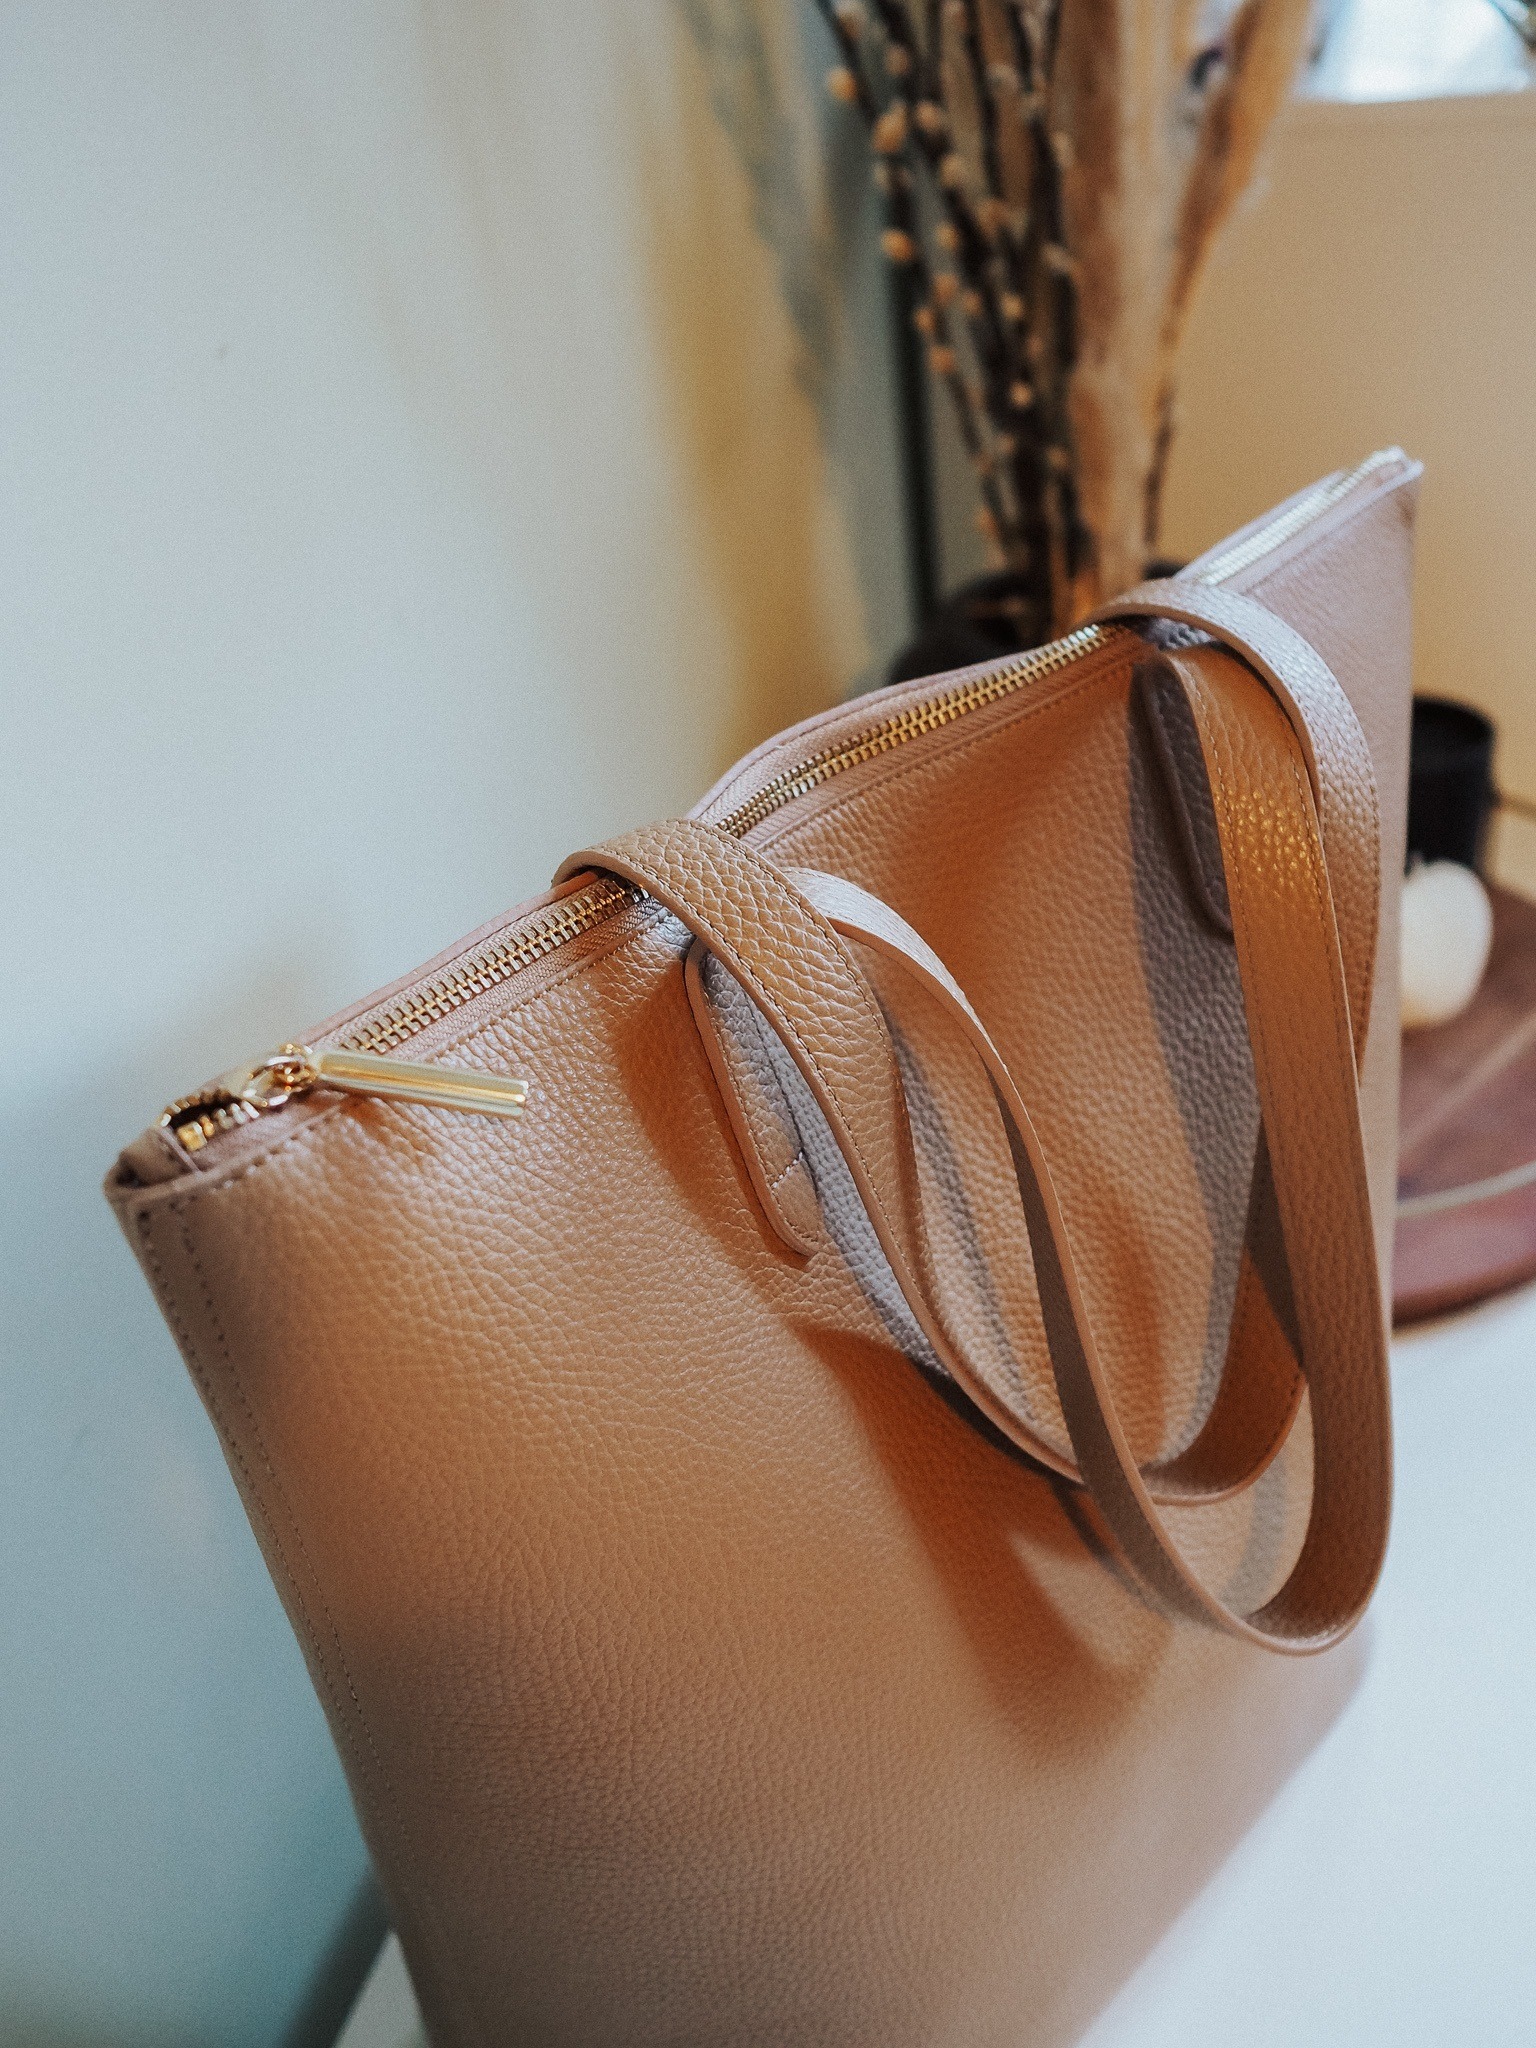 A Review of Cuyana's Classic Leather Zipper Tote and Tote Organization  Insert